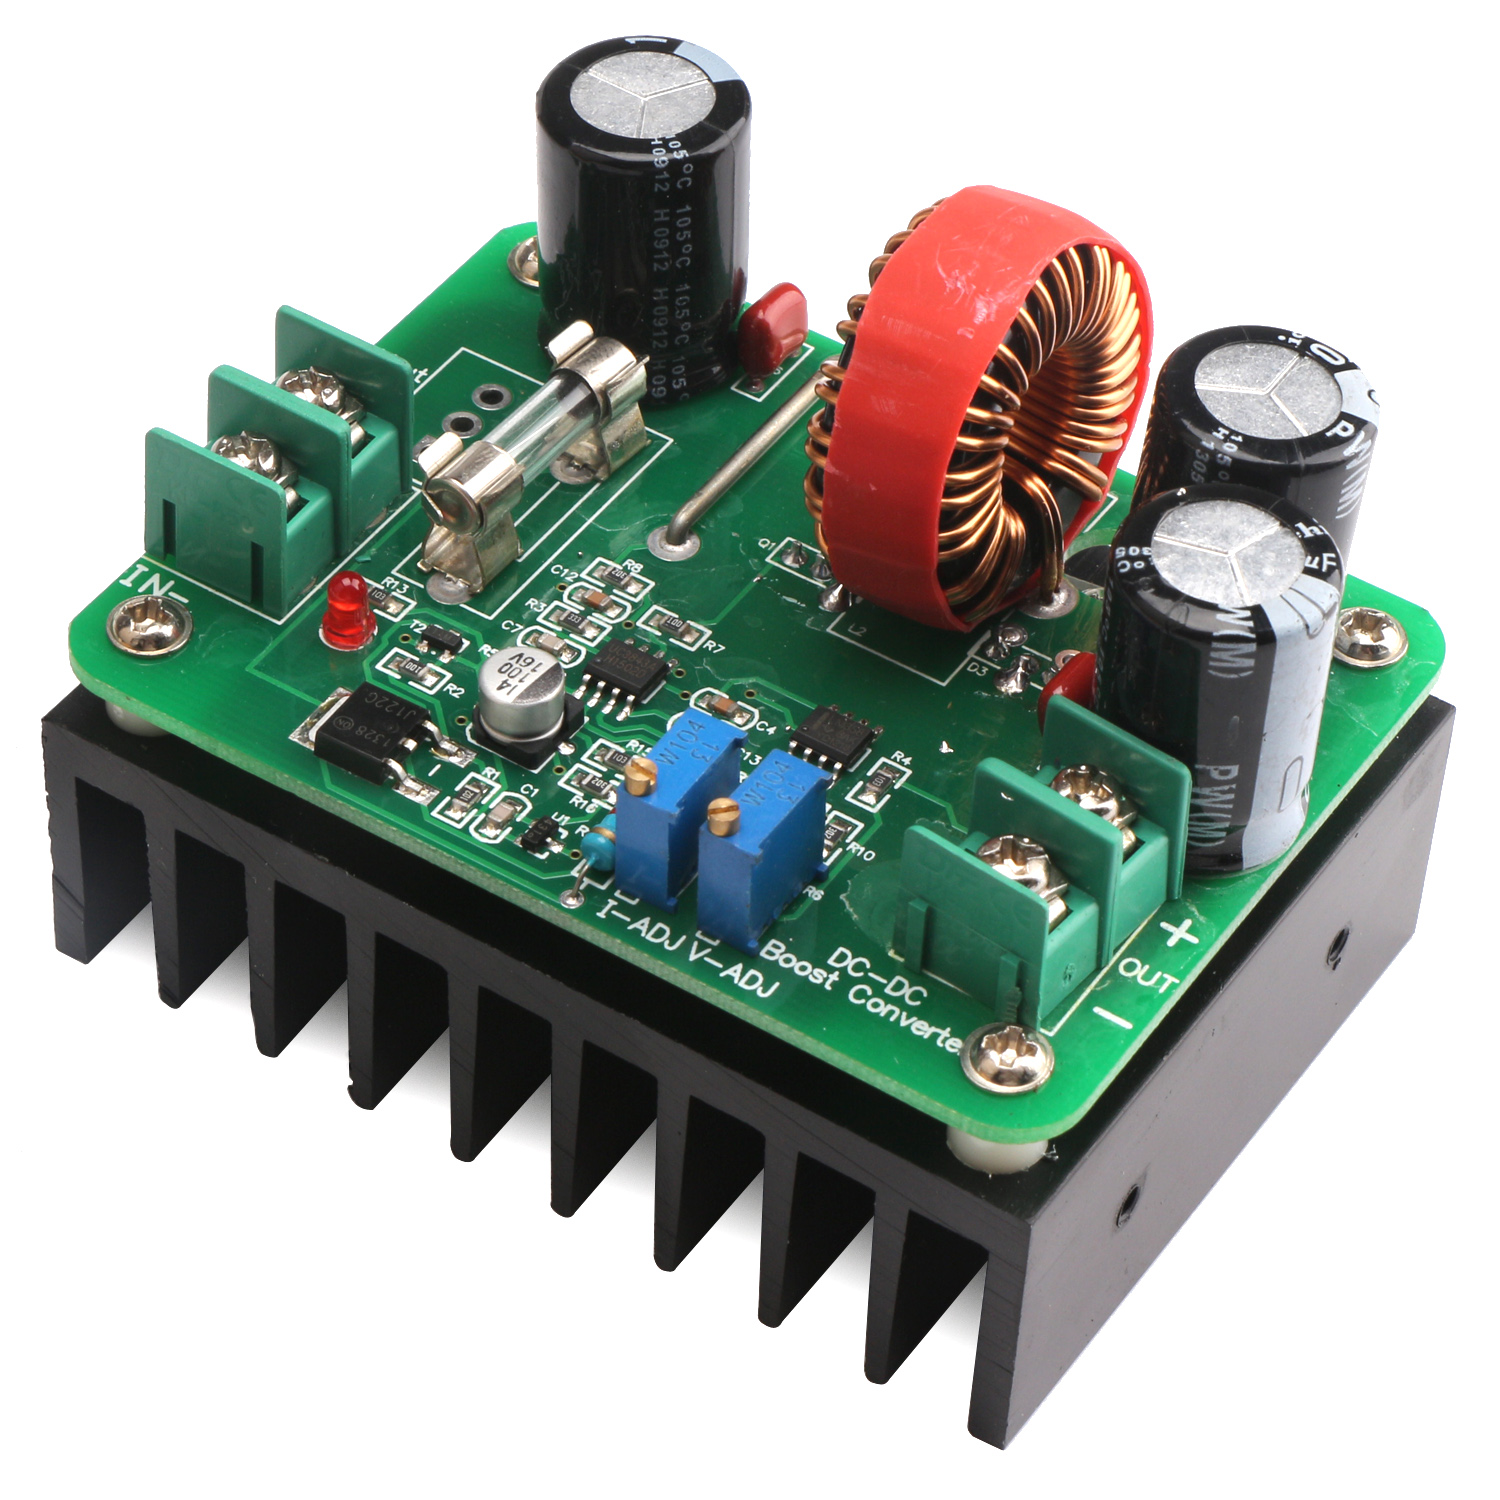 DC-DC 600W 10-60V to 12-80V Boost Converter Step-up Notebook Power Supply Module 